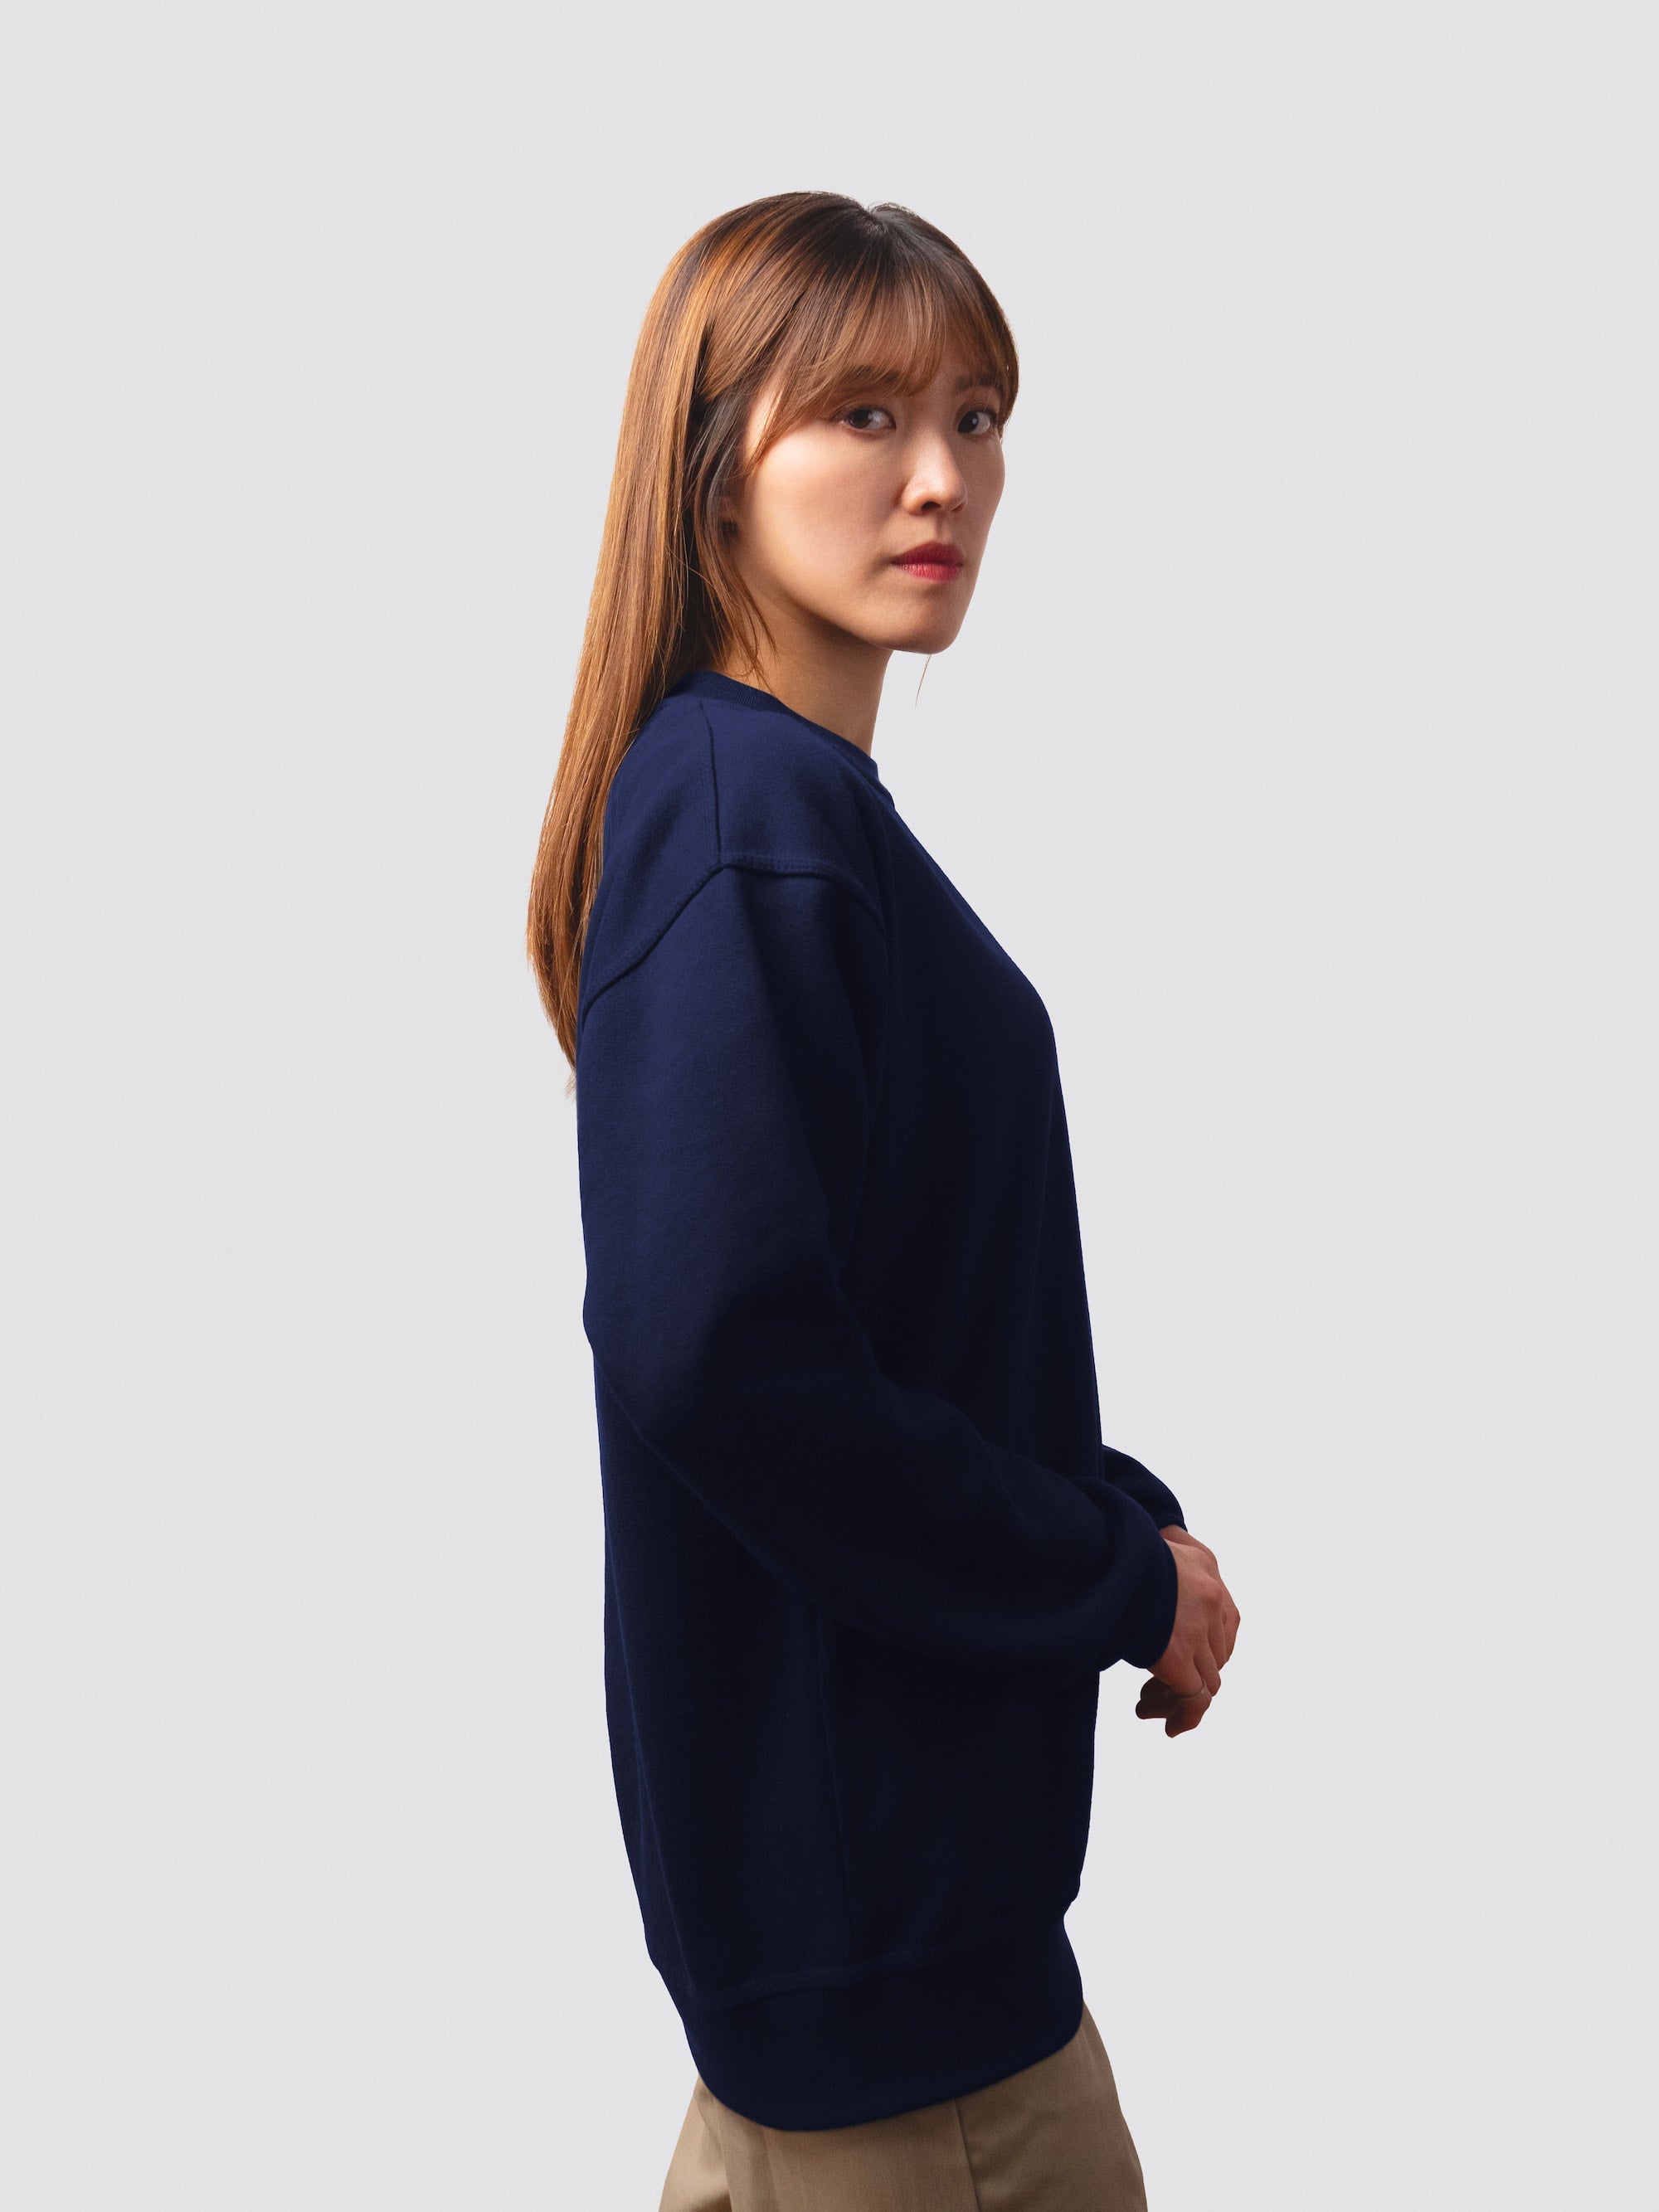 St Catherine's College sweatshirt in navy, worn by a female model